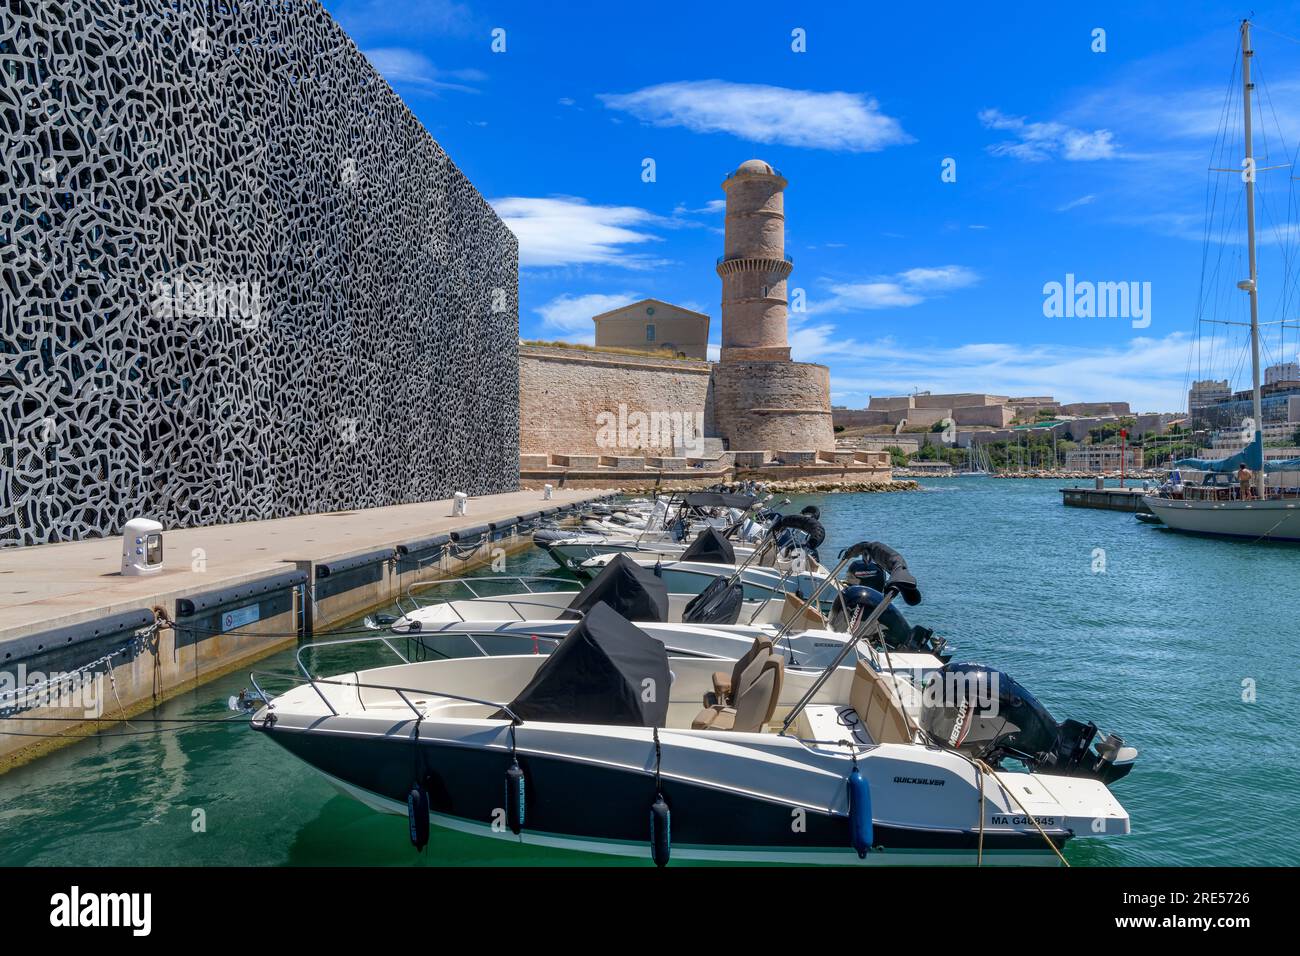 Rows of speedboats moored close the city of Marseille. Behind is the stone tower of Tour du Fanal, built in 1644 to guide ships into the old port. Stock Photo